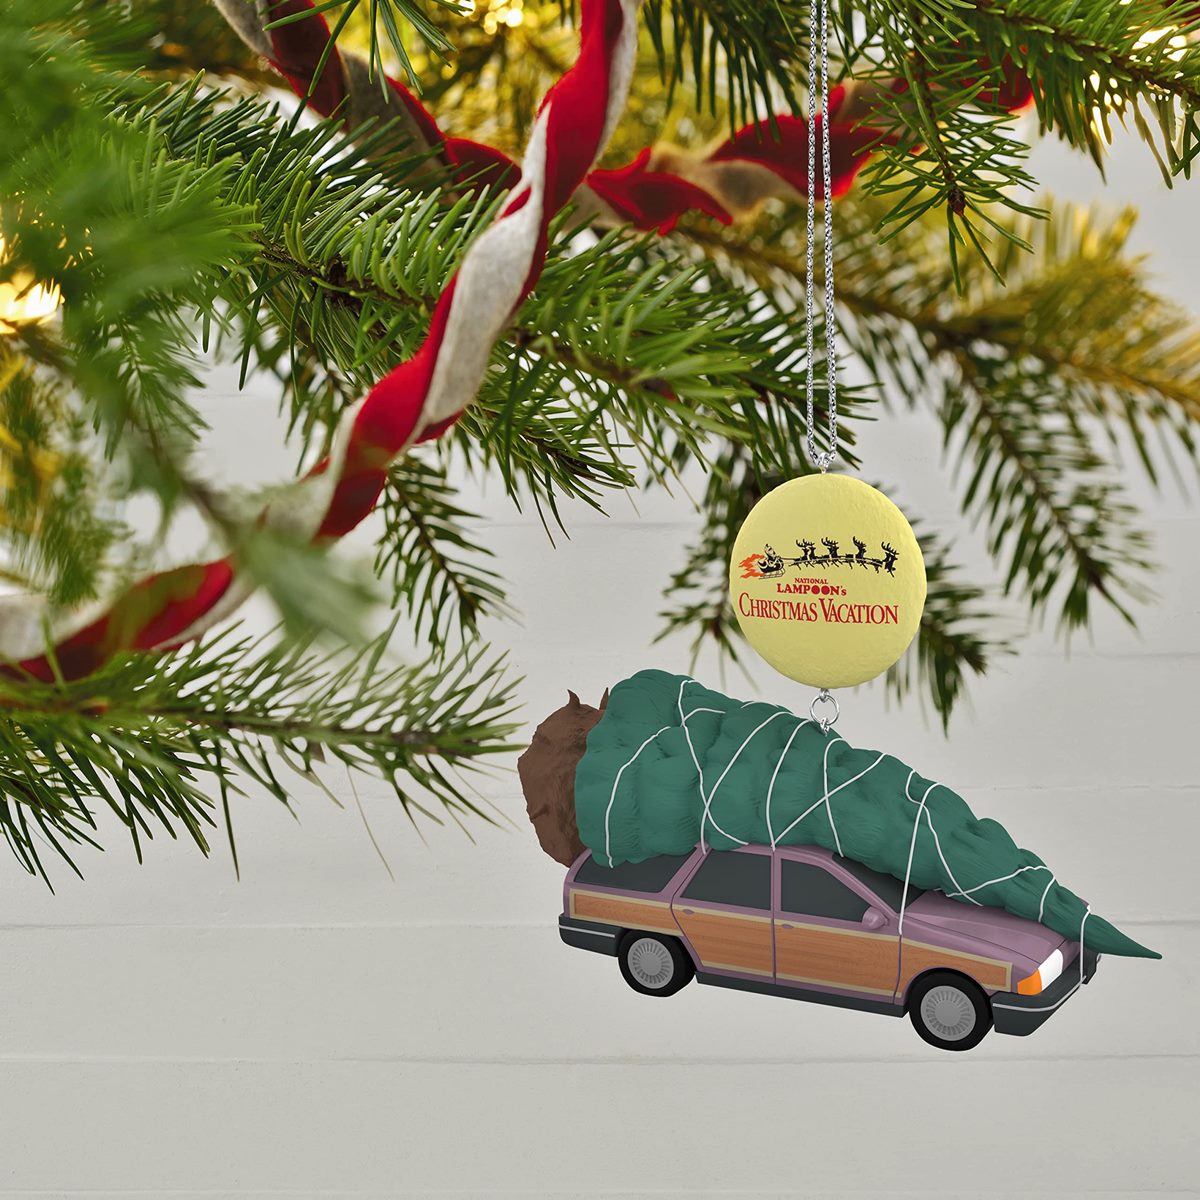 9 Superior Christmas Vacation Ornament for 2023